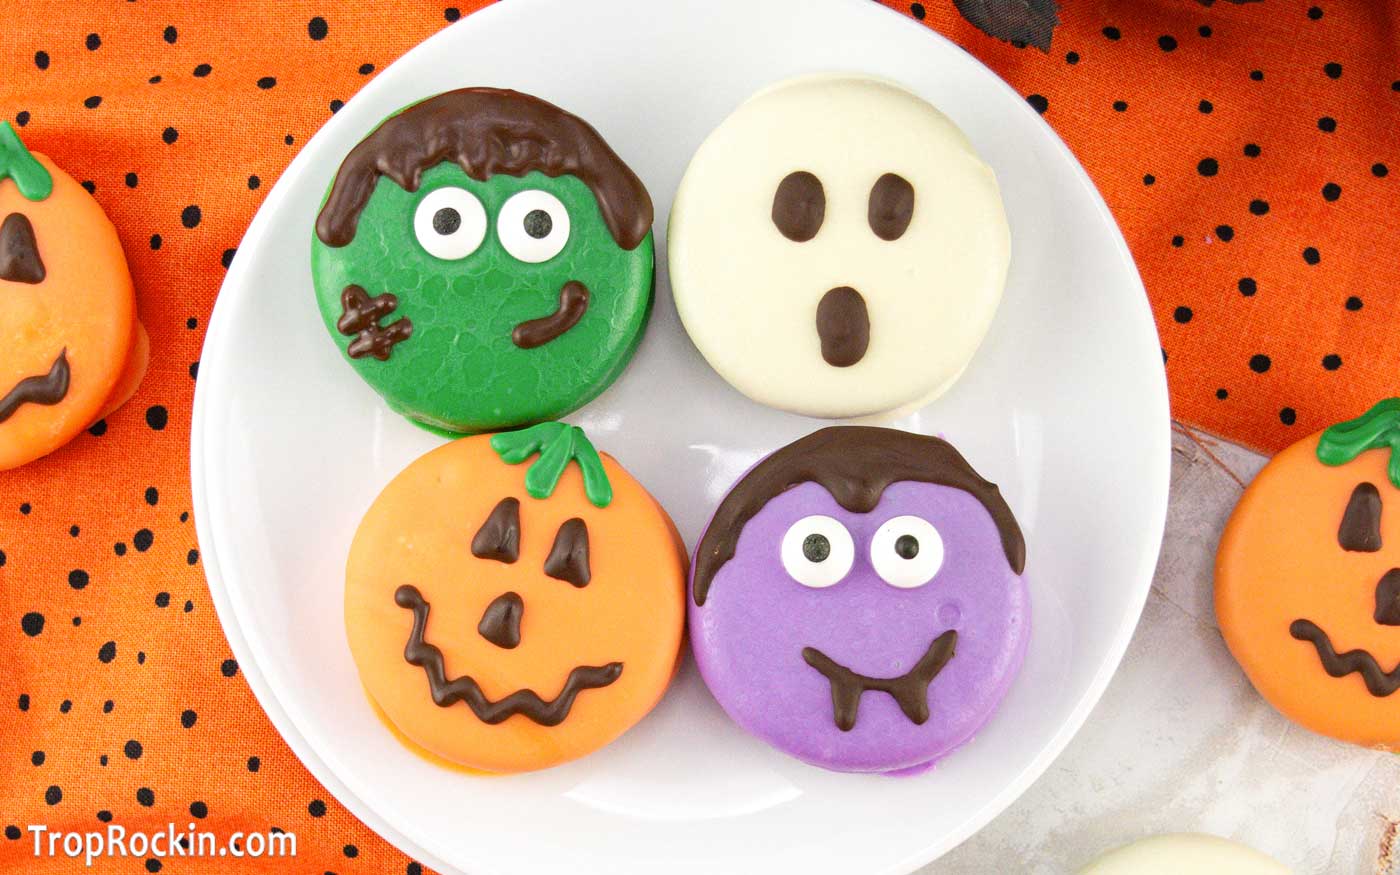 Halloween Chocolate Covered Oreos decorated in four ways: Green Frankenstein, Orange Jack-o-lantern,Purple Vampire and a white ghost.